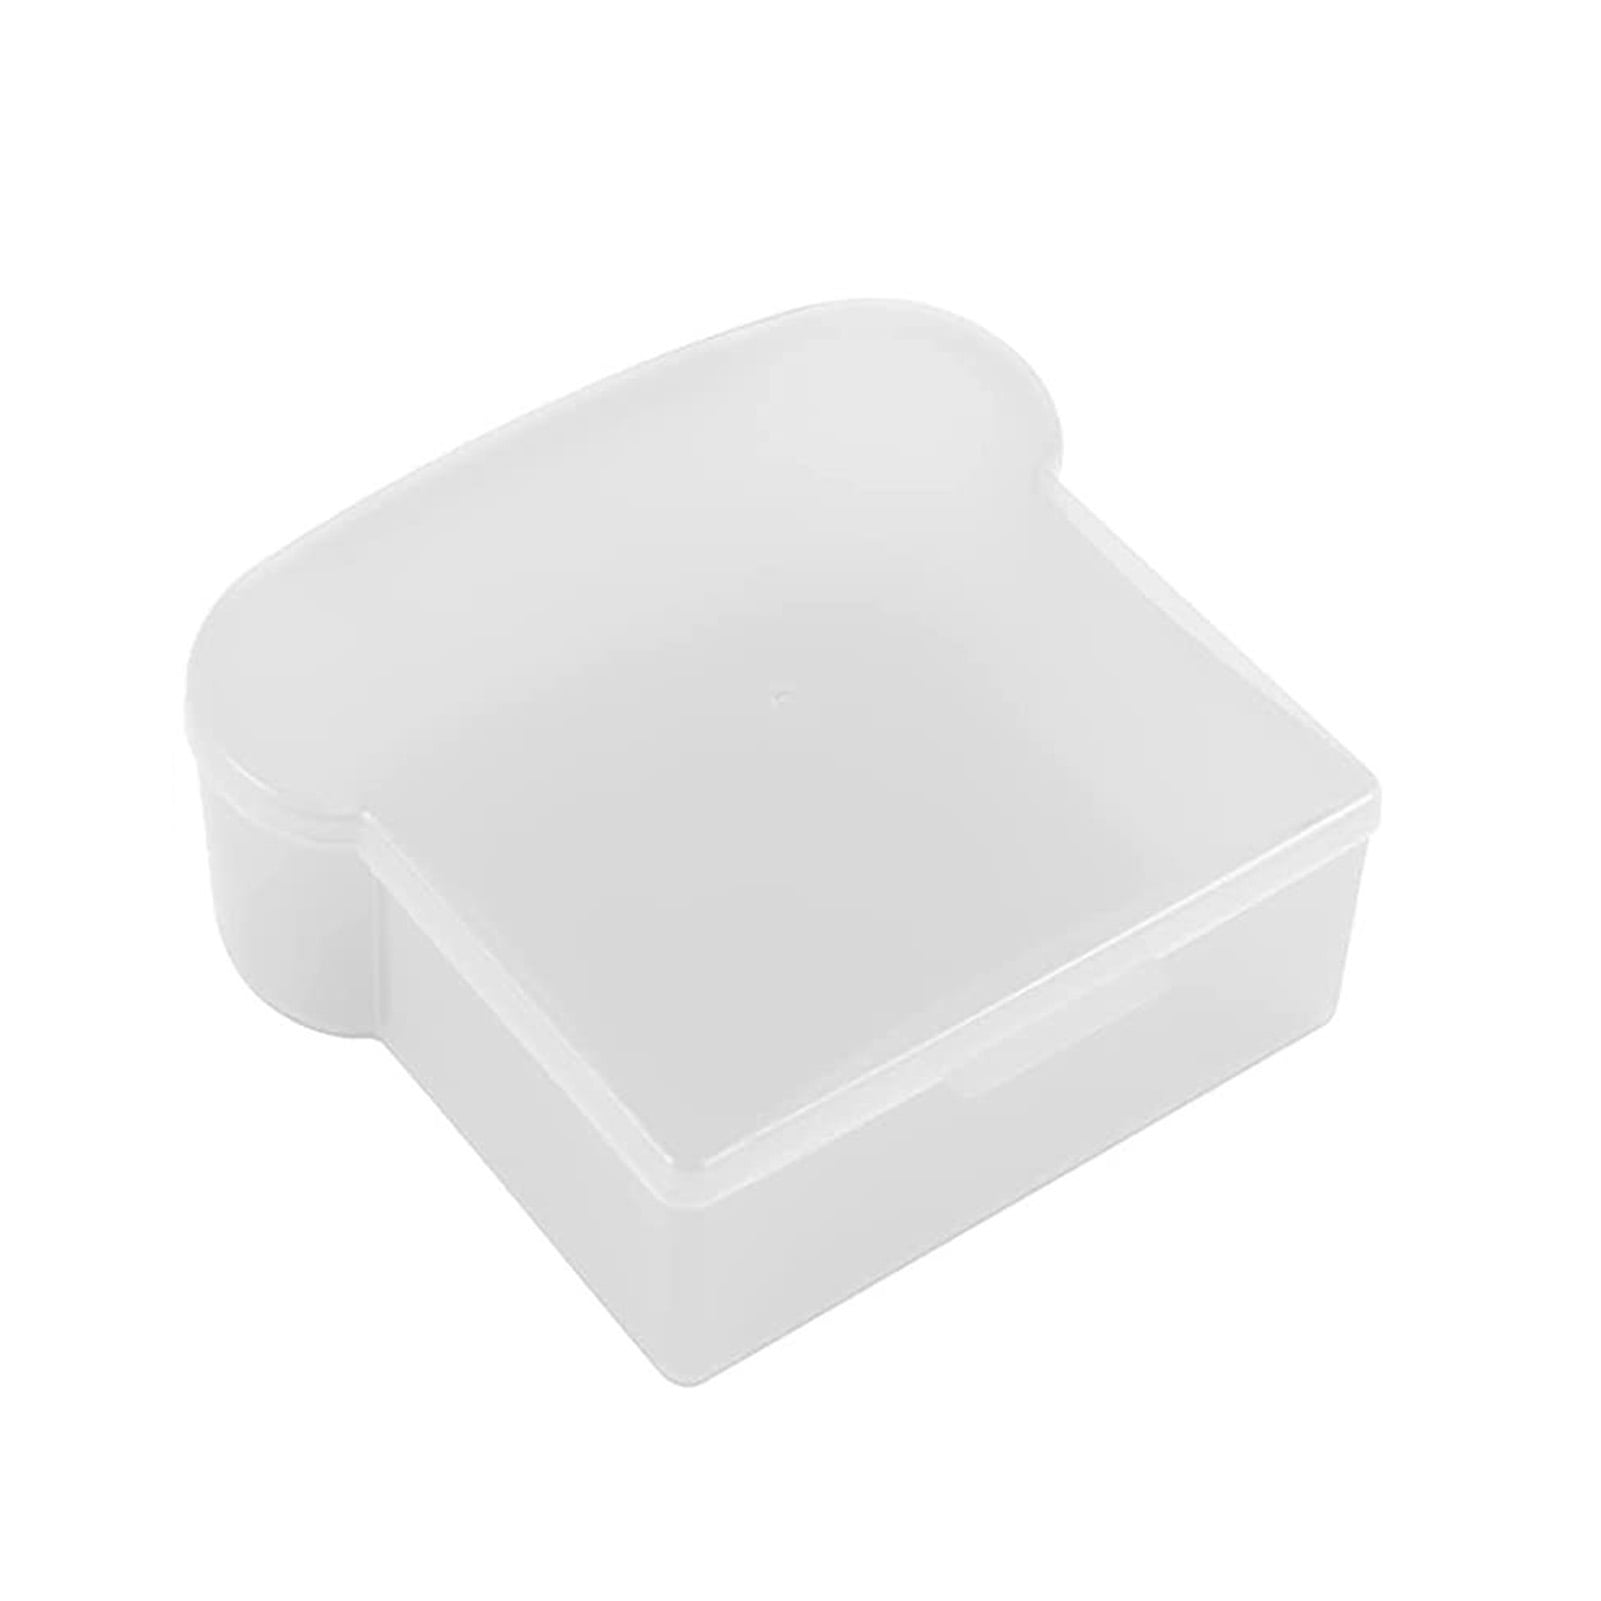  6 Pieces 20 oz Toast Shape Sandwich Box 5.3 x 5.5 x 2 Inches  Plastic Sandwich Containers Reusable Sandwich Holder for Lunch Box Sandwich  Lunch Box Colorful Sandwich Food Storage for